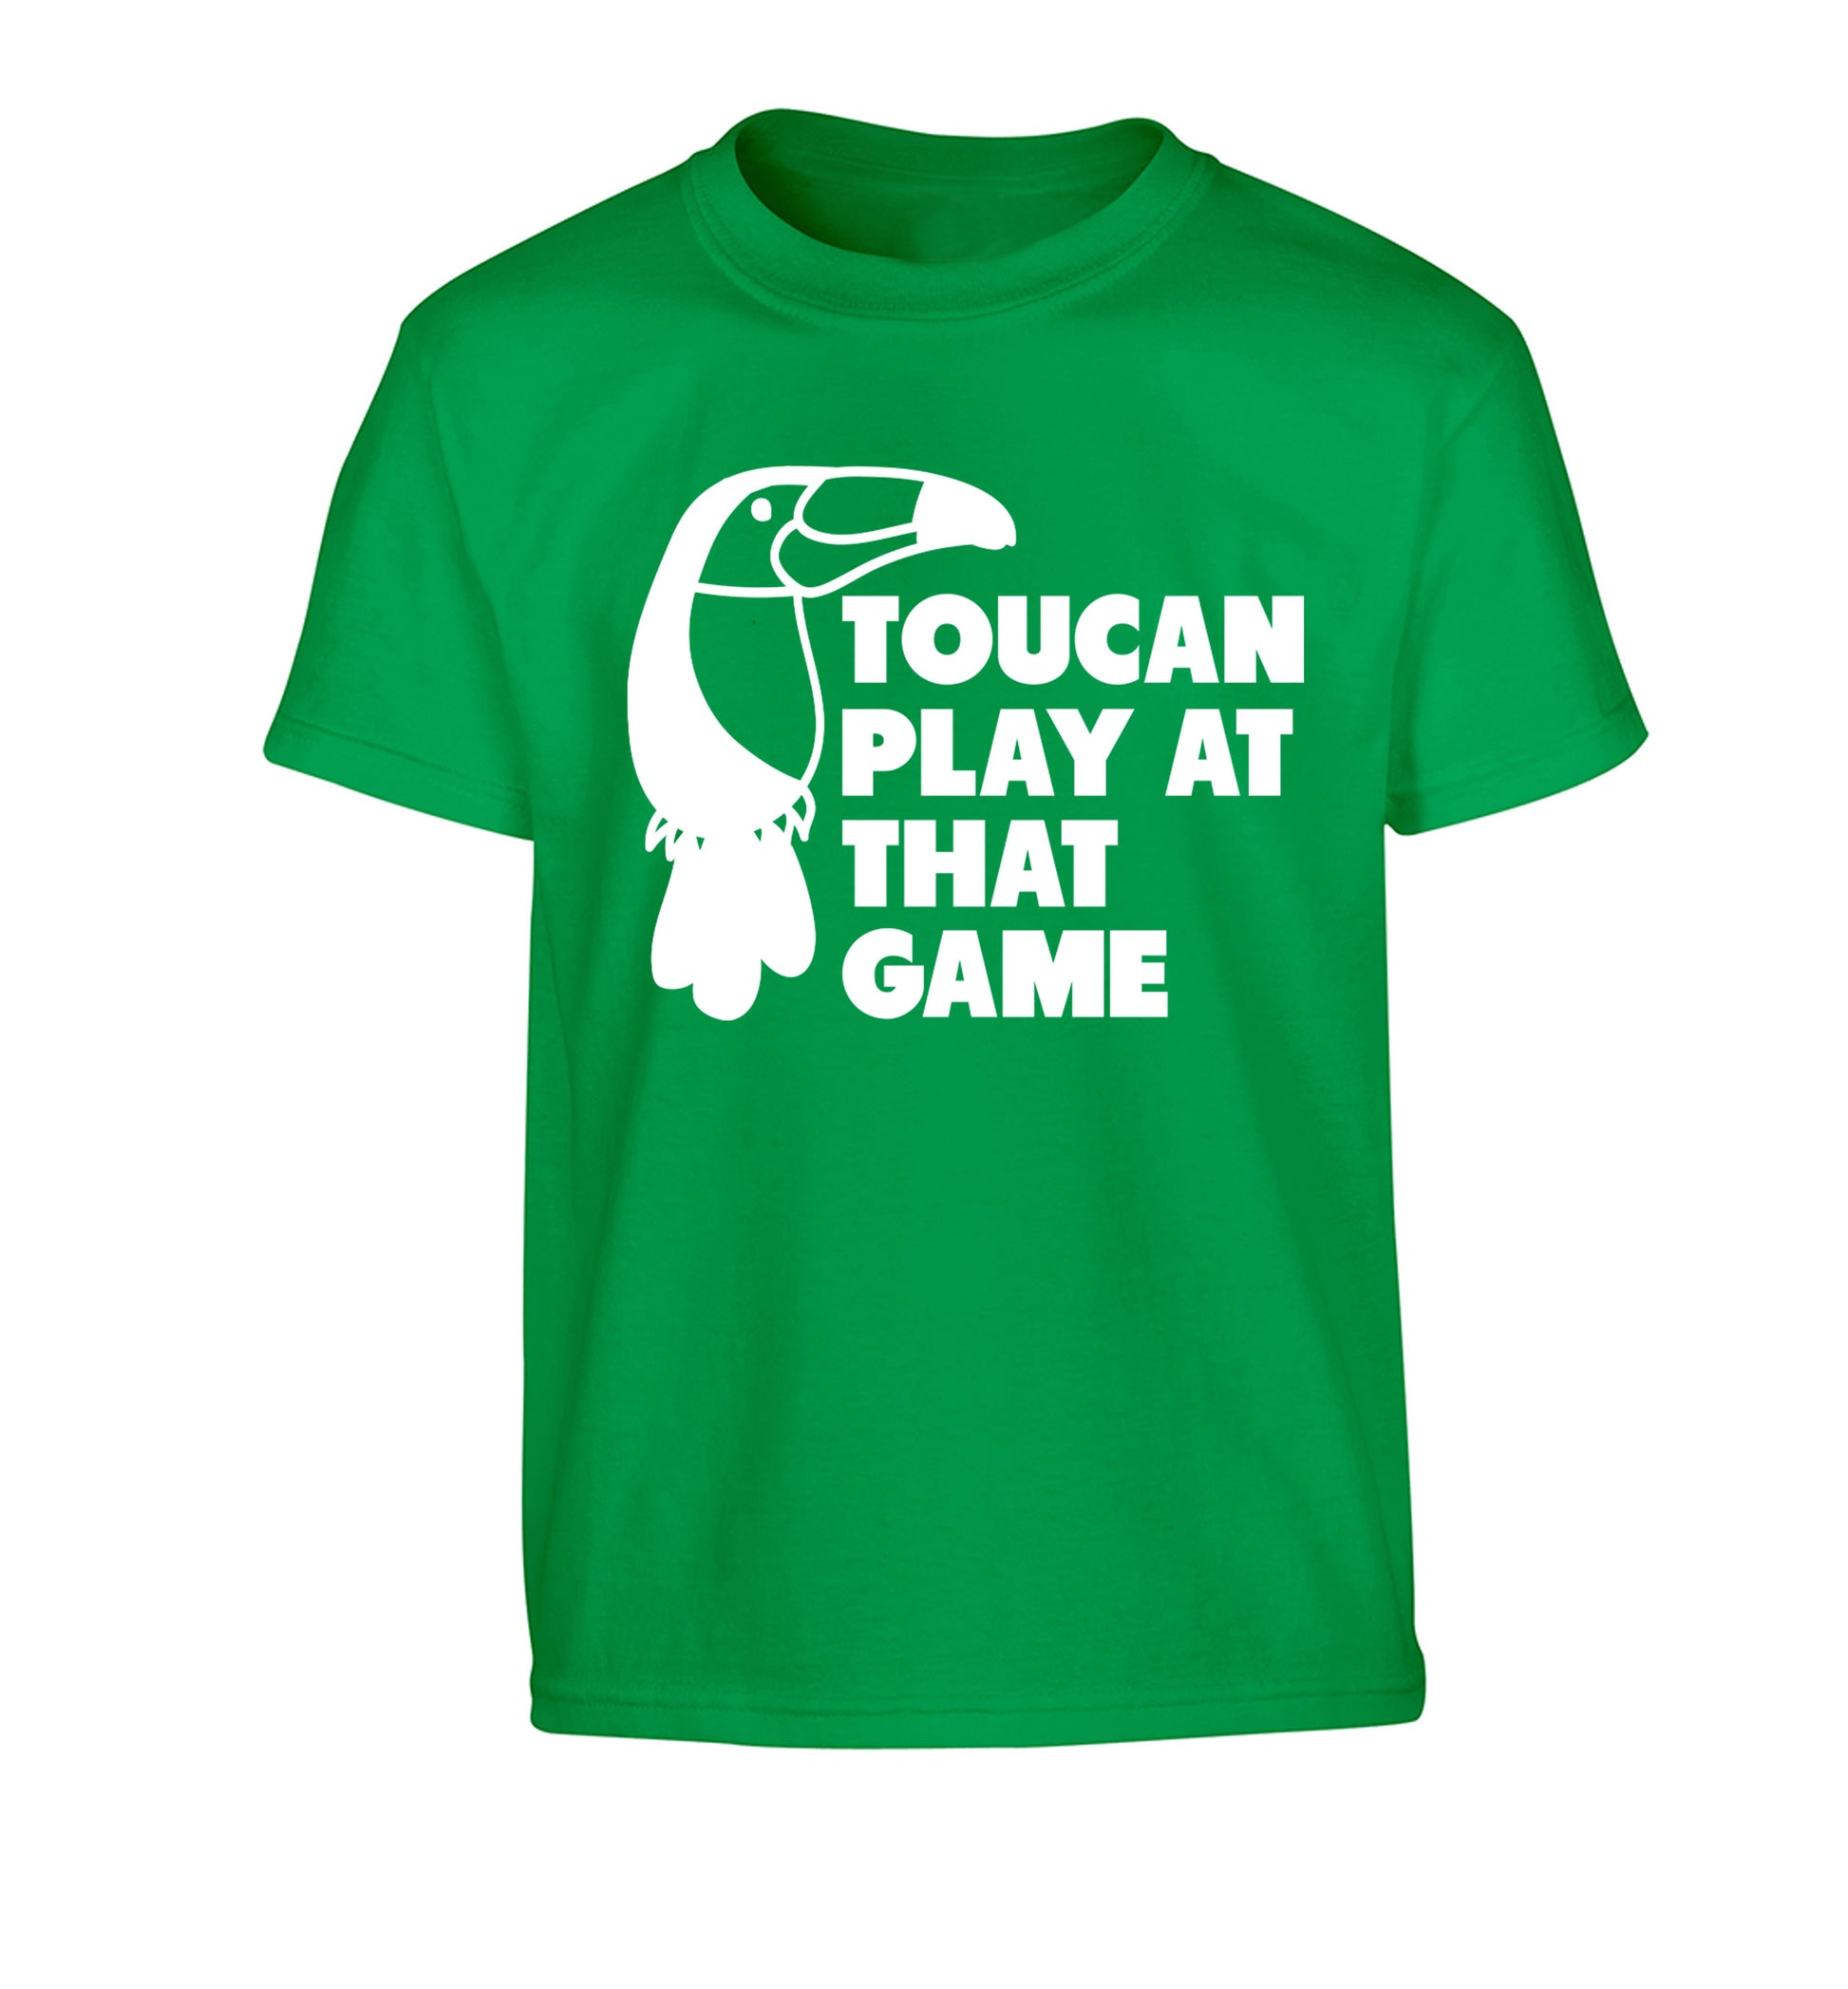 Toucan play at that game Children's green Tshirt 12-13 Years